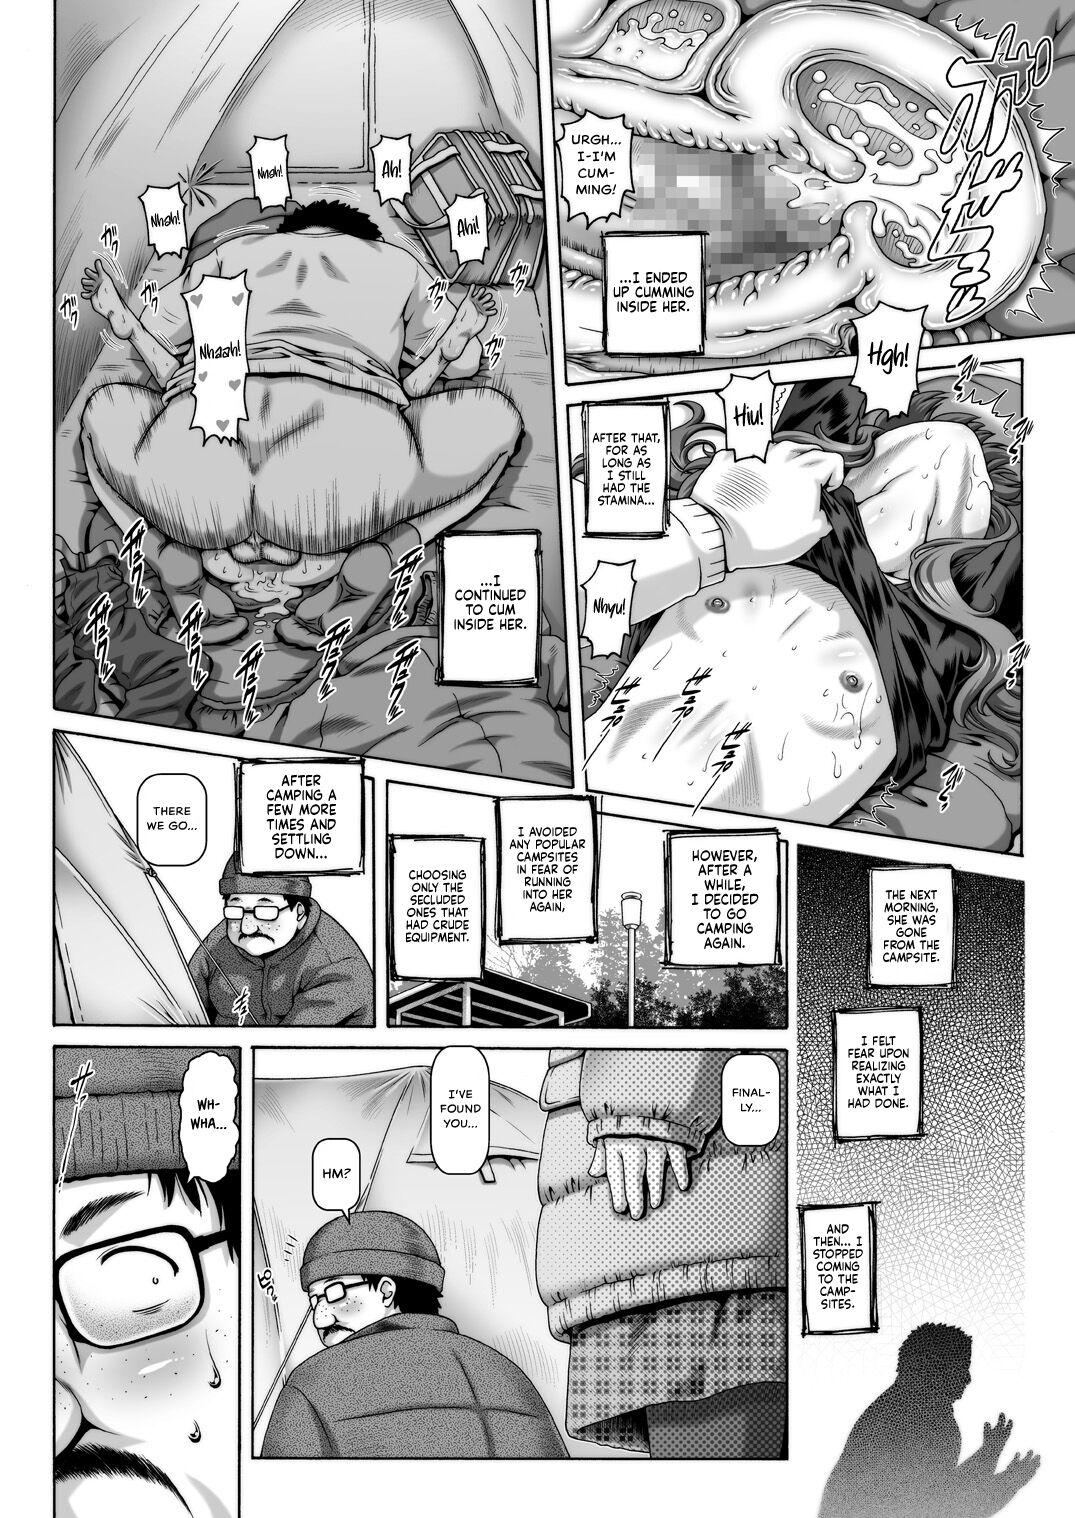 Money EMPIRE HARD CORE 2021 SPRING - Yuru camp | laid back camp Assfucked - Page 10